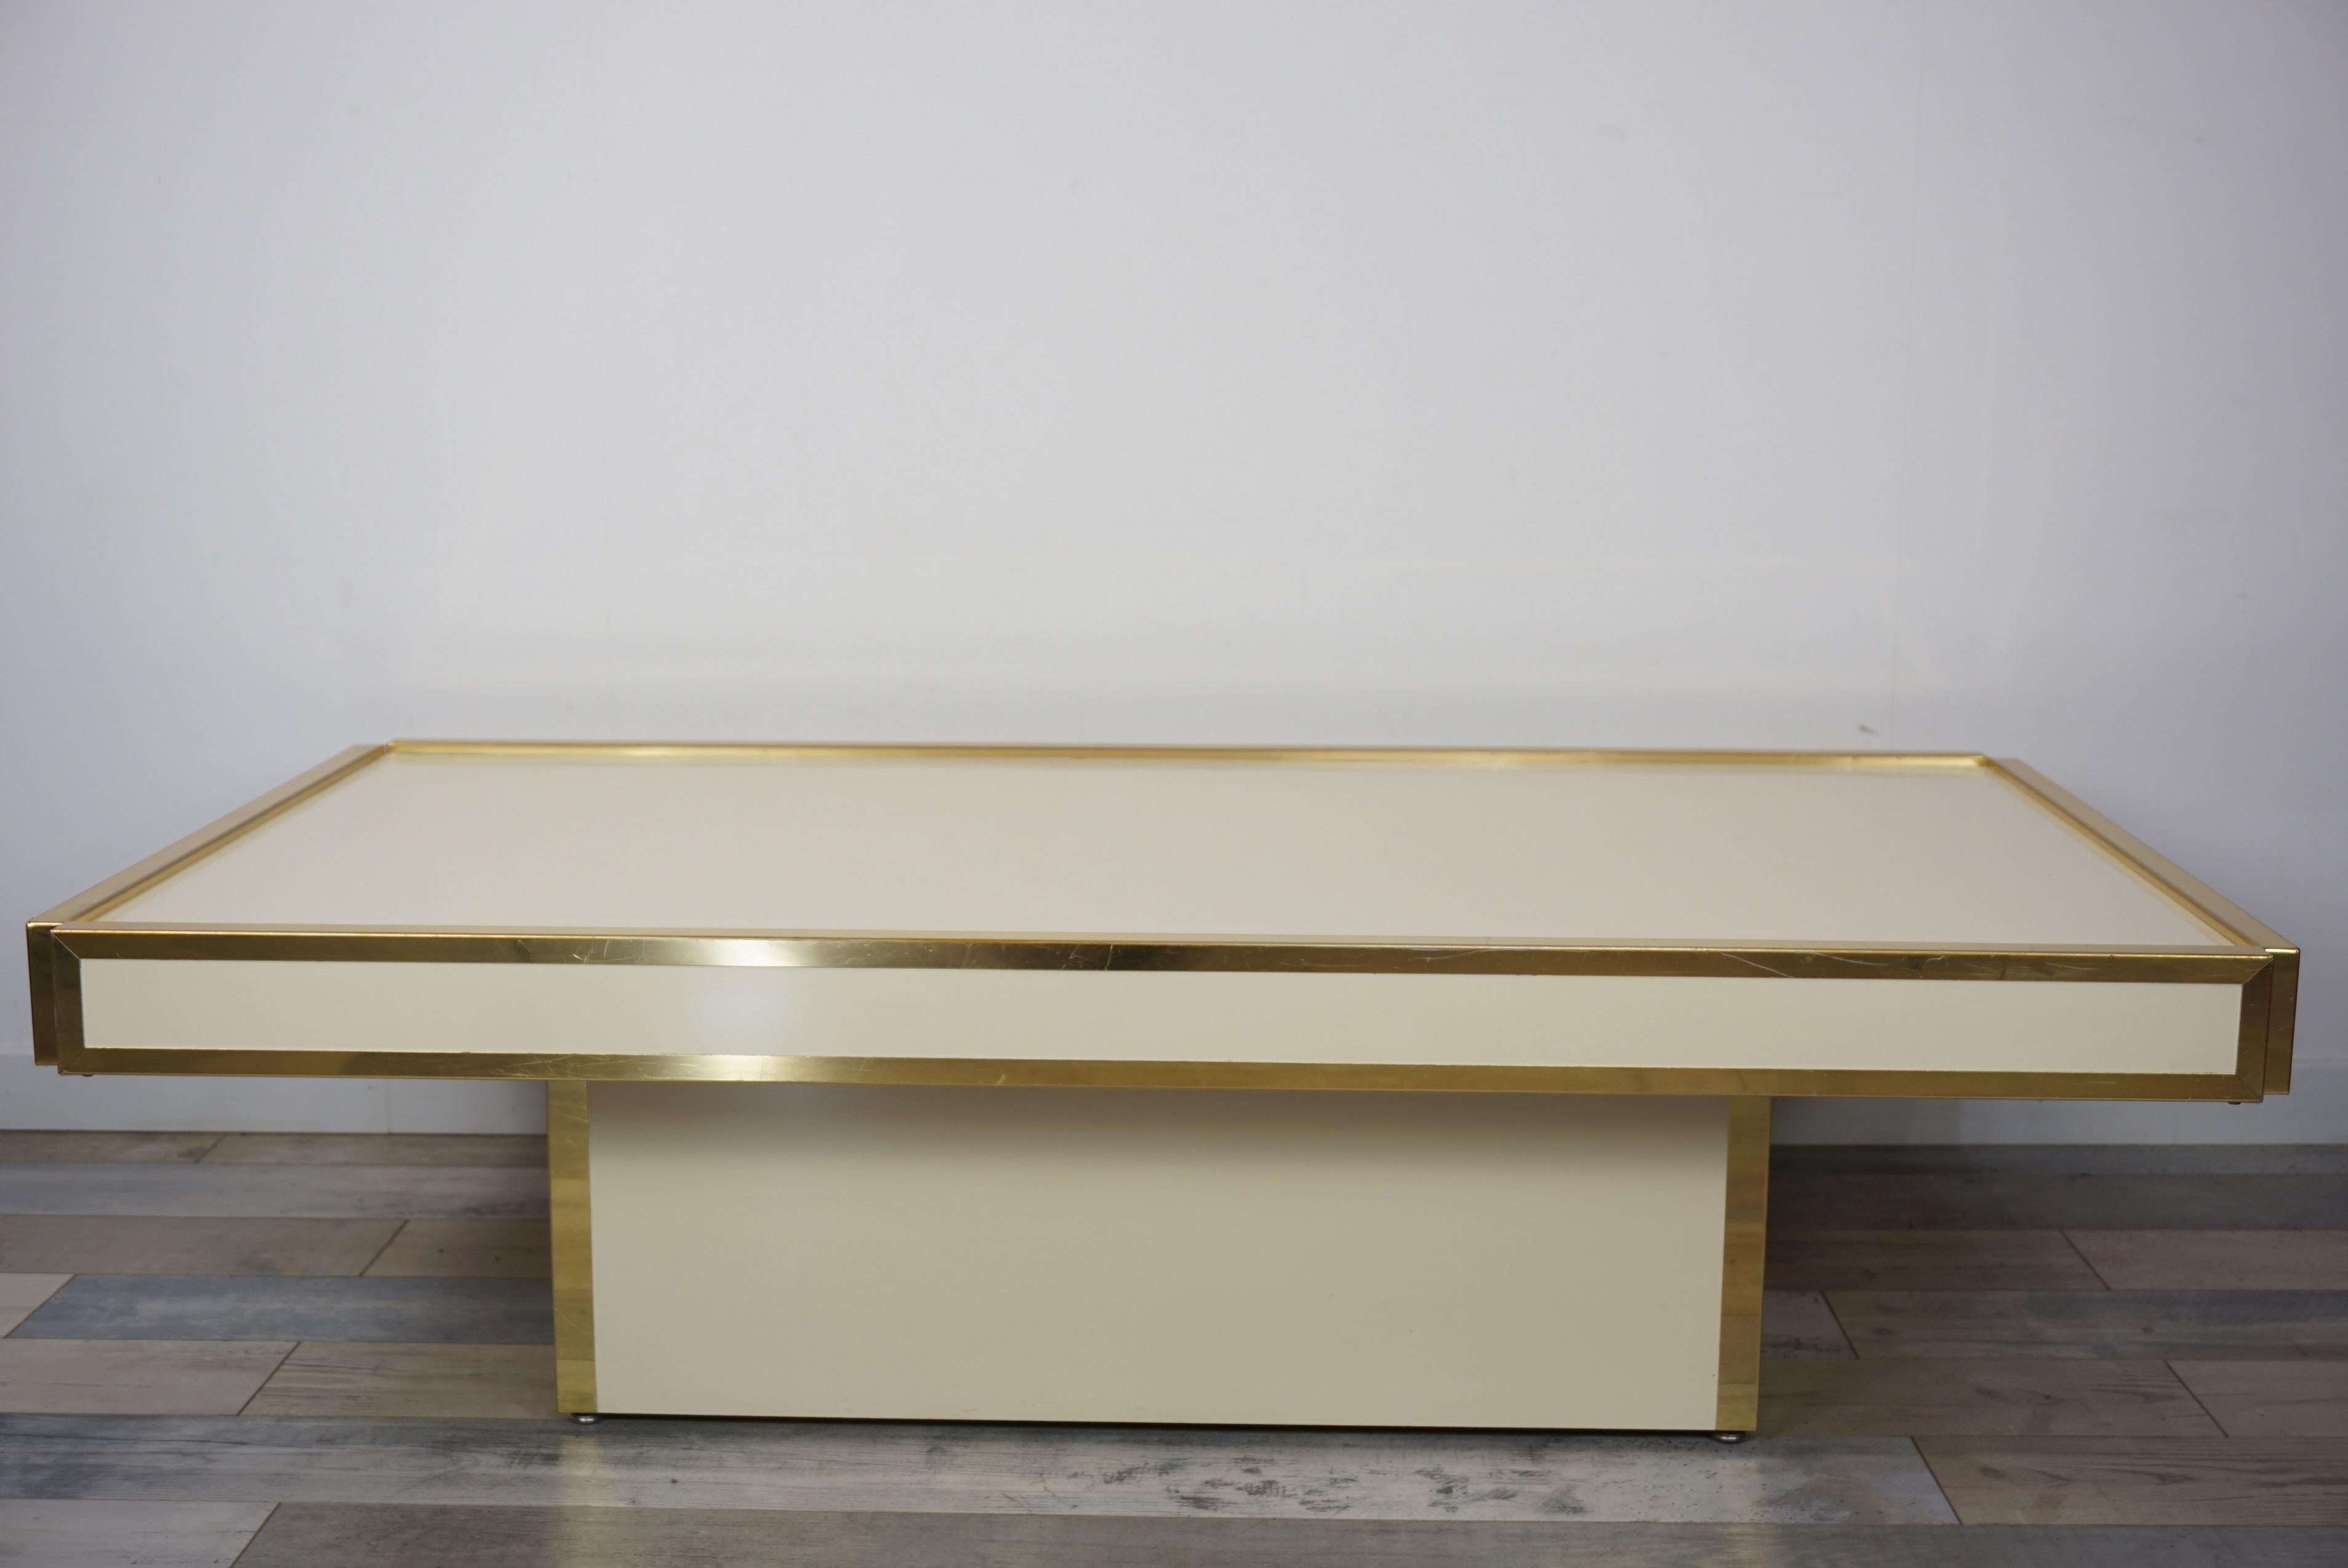 1960s-1970s Italian design coffee table with graphical and geometric lines, angles decorated with brass and ivory lacquer at the manner of Willy Rizzo and Aldo Tura. Rare!